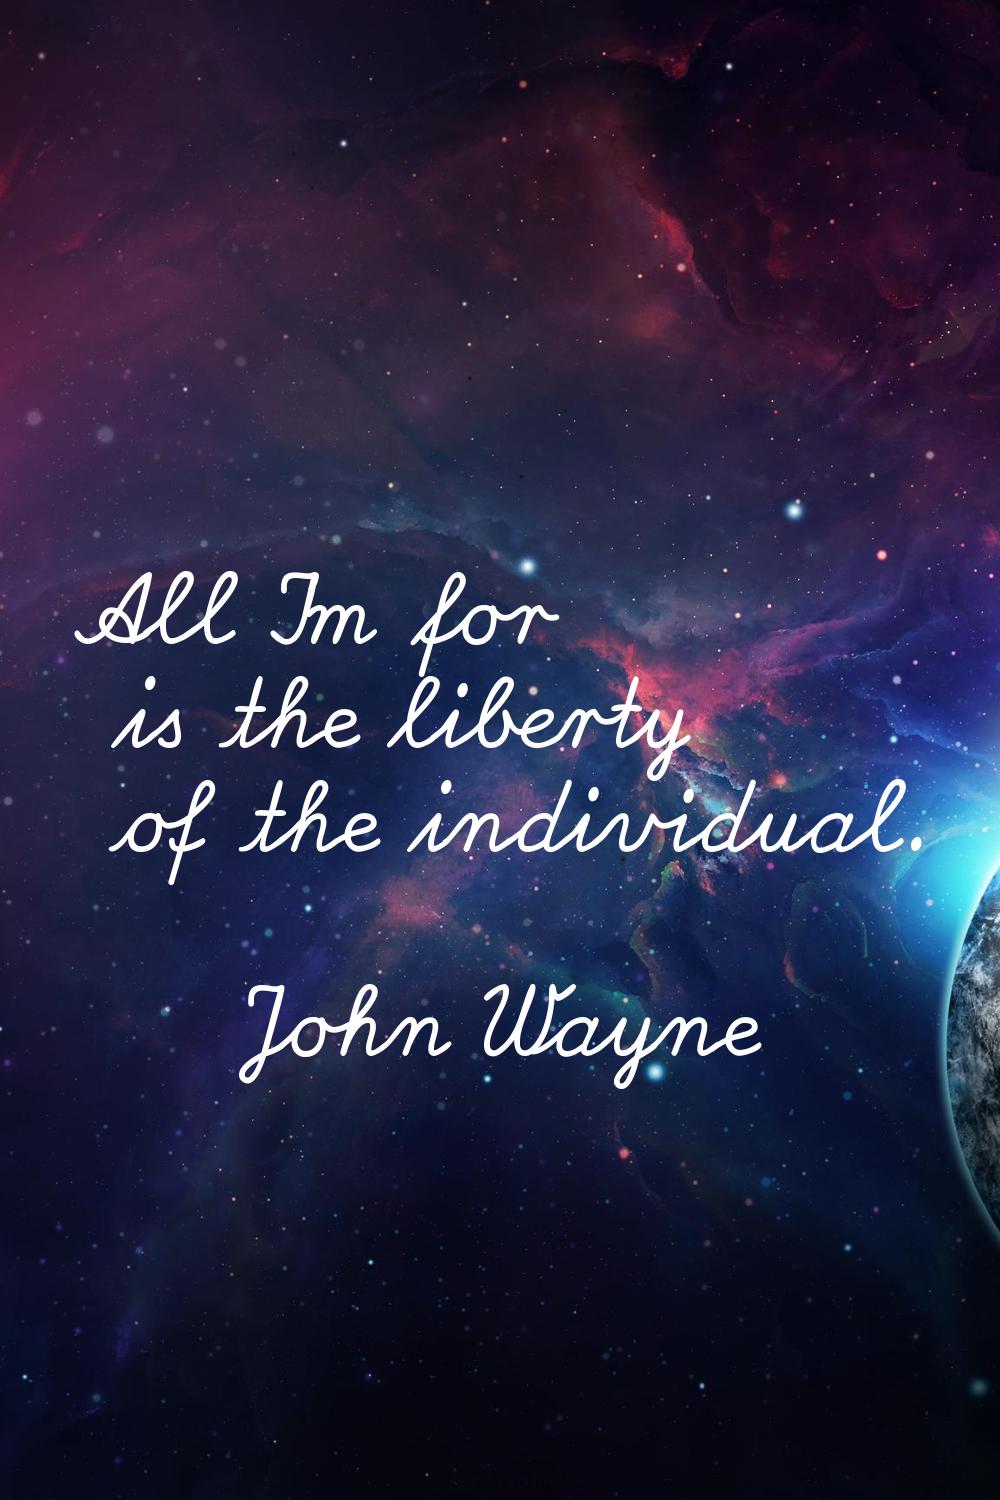 All I'm for is the liberty of the individual.